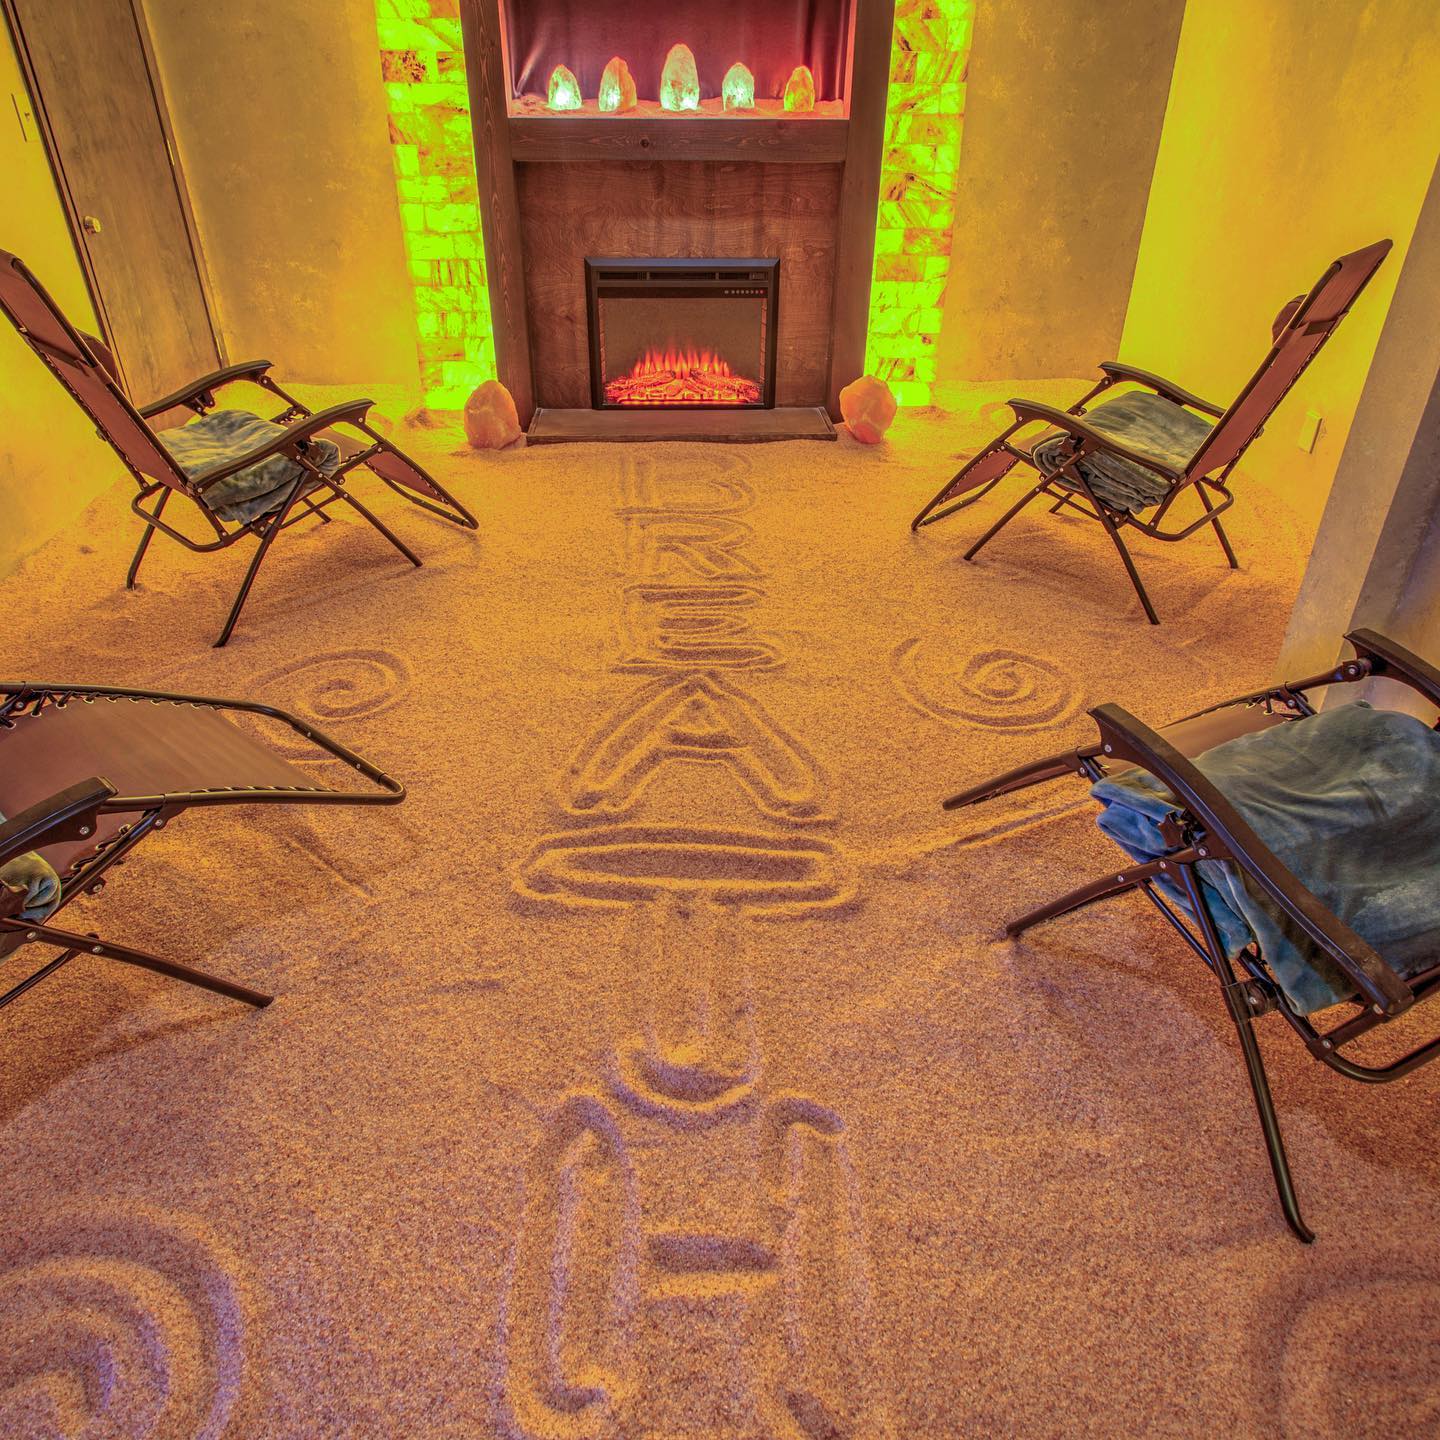 Four Reclining Chairs On A Salt Covered Floor With Writing That Says &Quot;Breath&Quot; Facing A Fireplace With Led Backlit Salt Panels At The Radiant Well-Being - Boone, North Carolina.